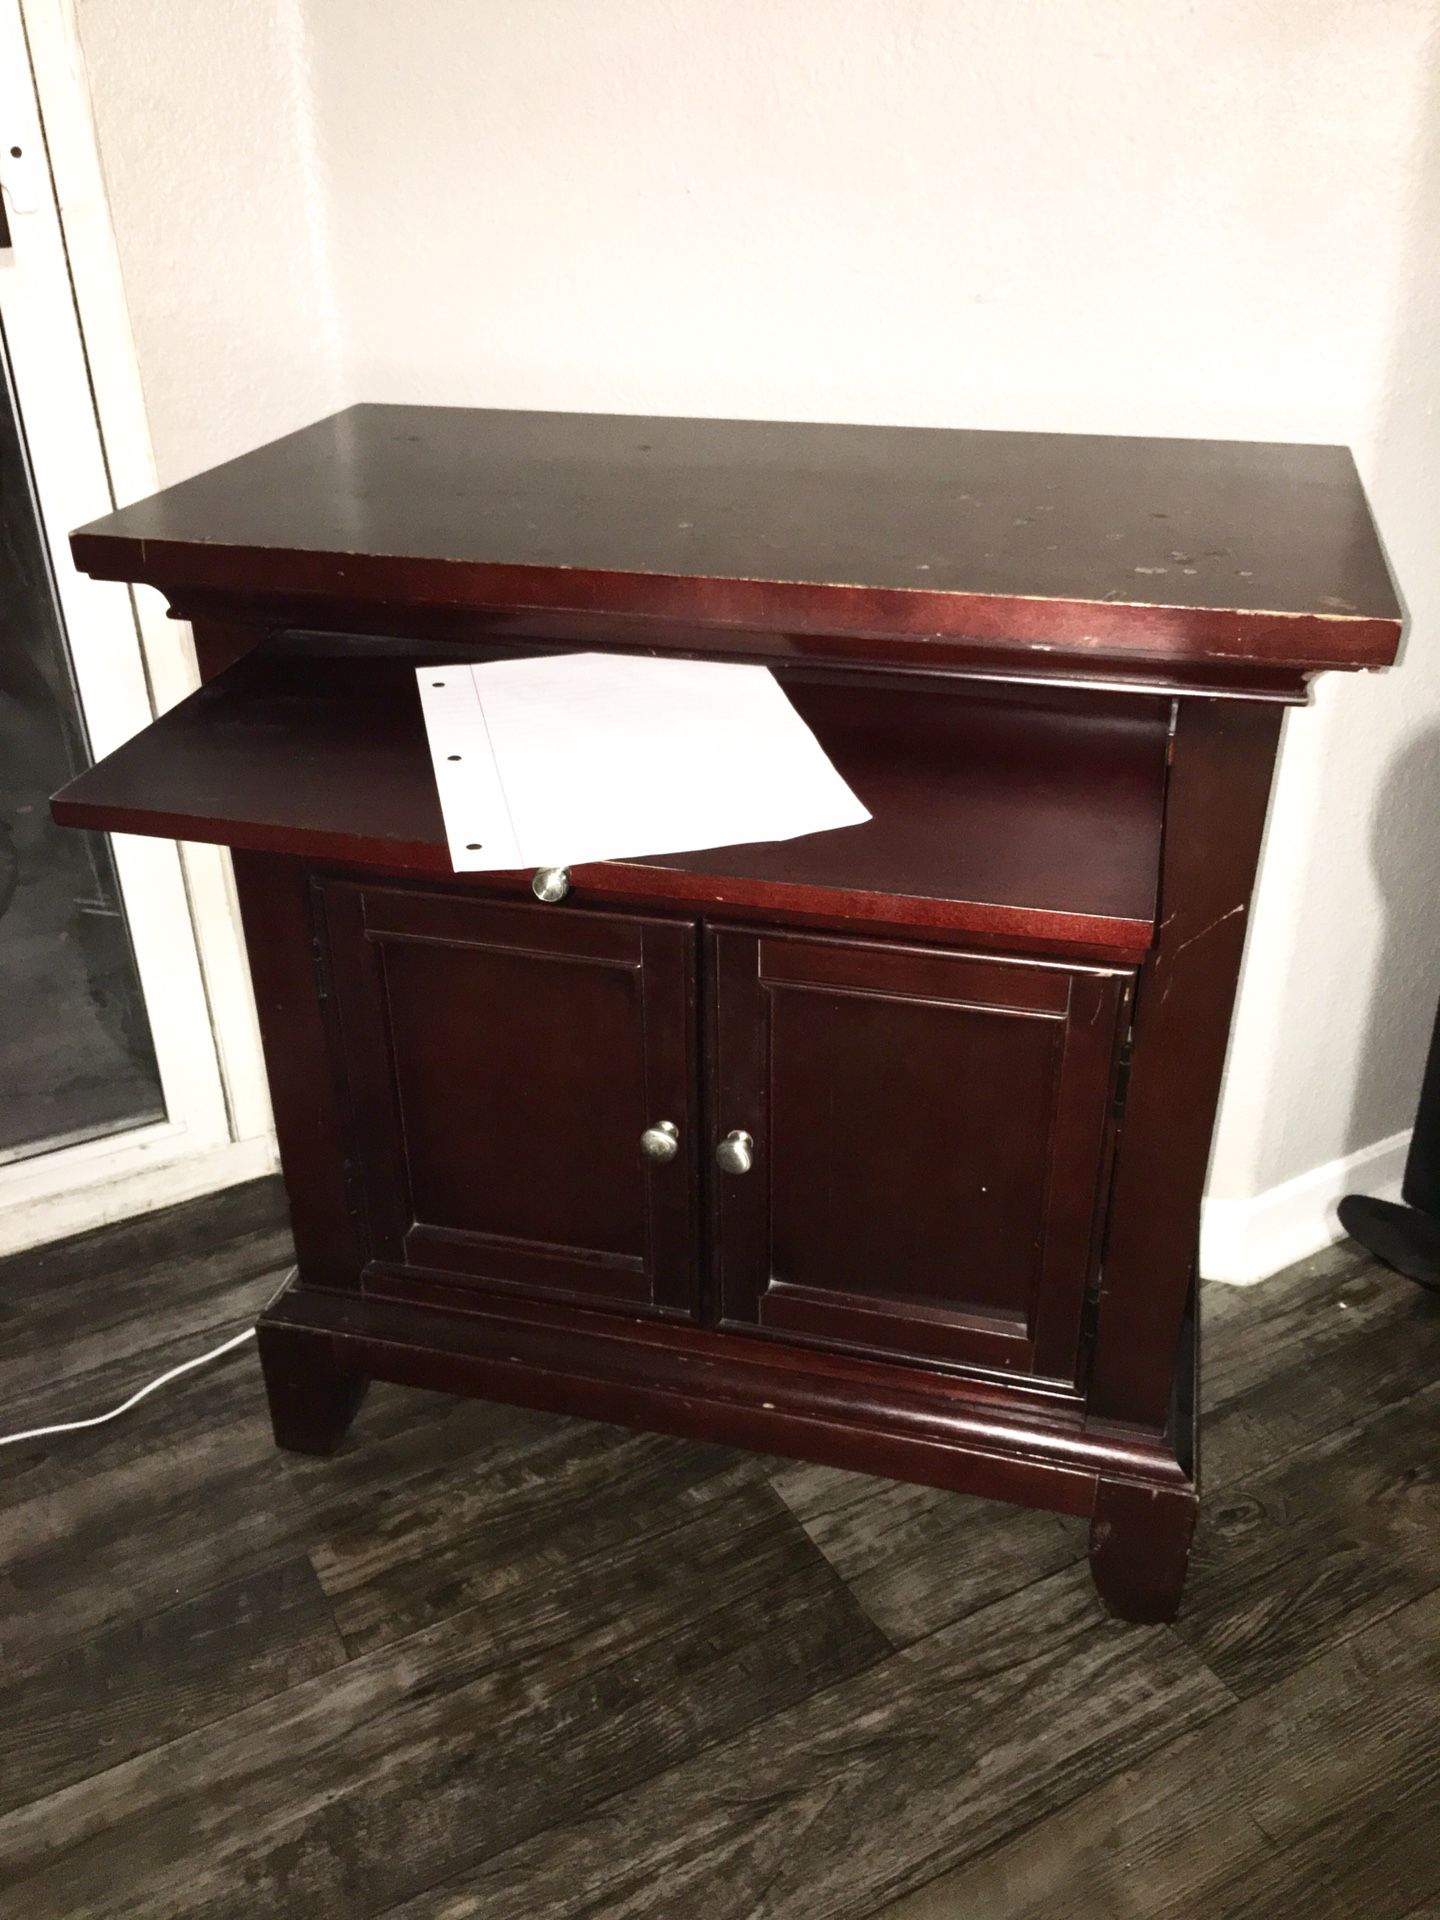 Small, Compact Secretary Desk Made Out Of Real Wood - Beautiful Cherrywood Color - Priced To Sell! - $30